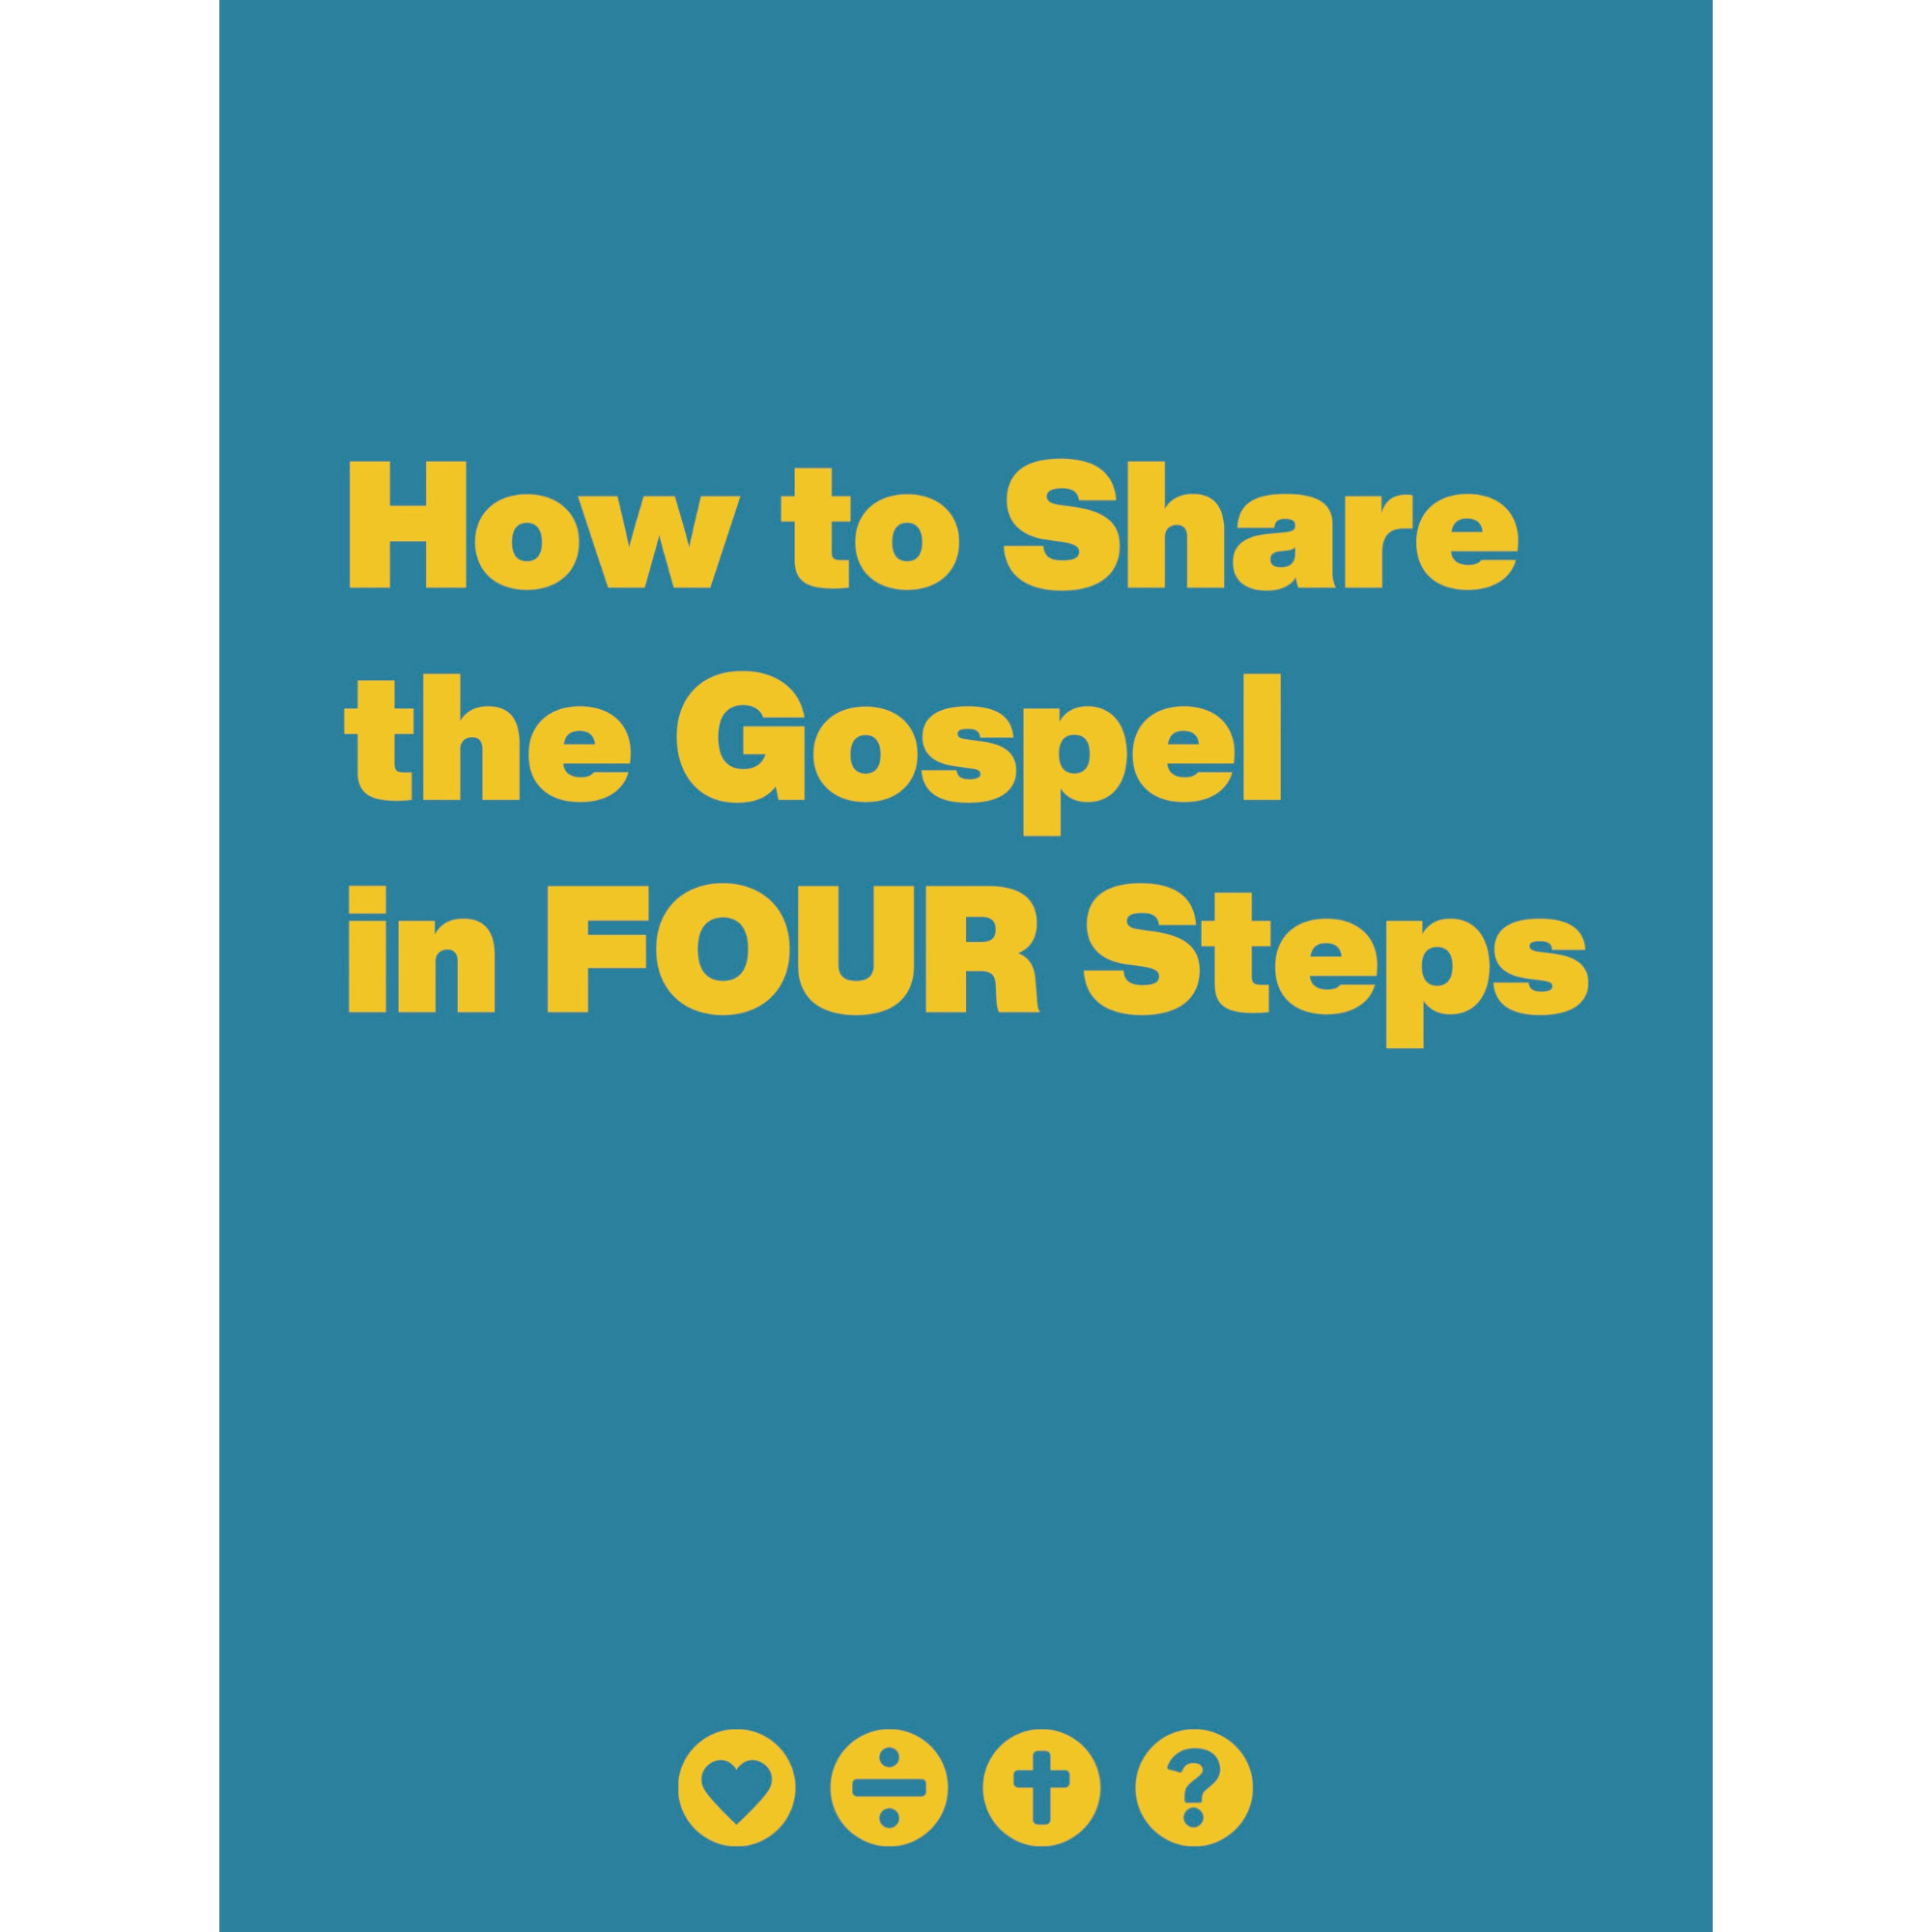 How to Share the Gospel in FOUR Steps (E-book)